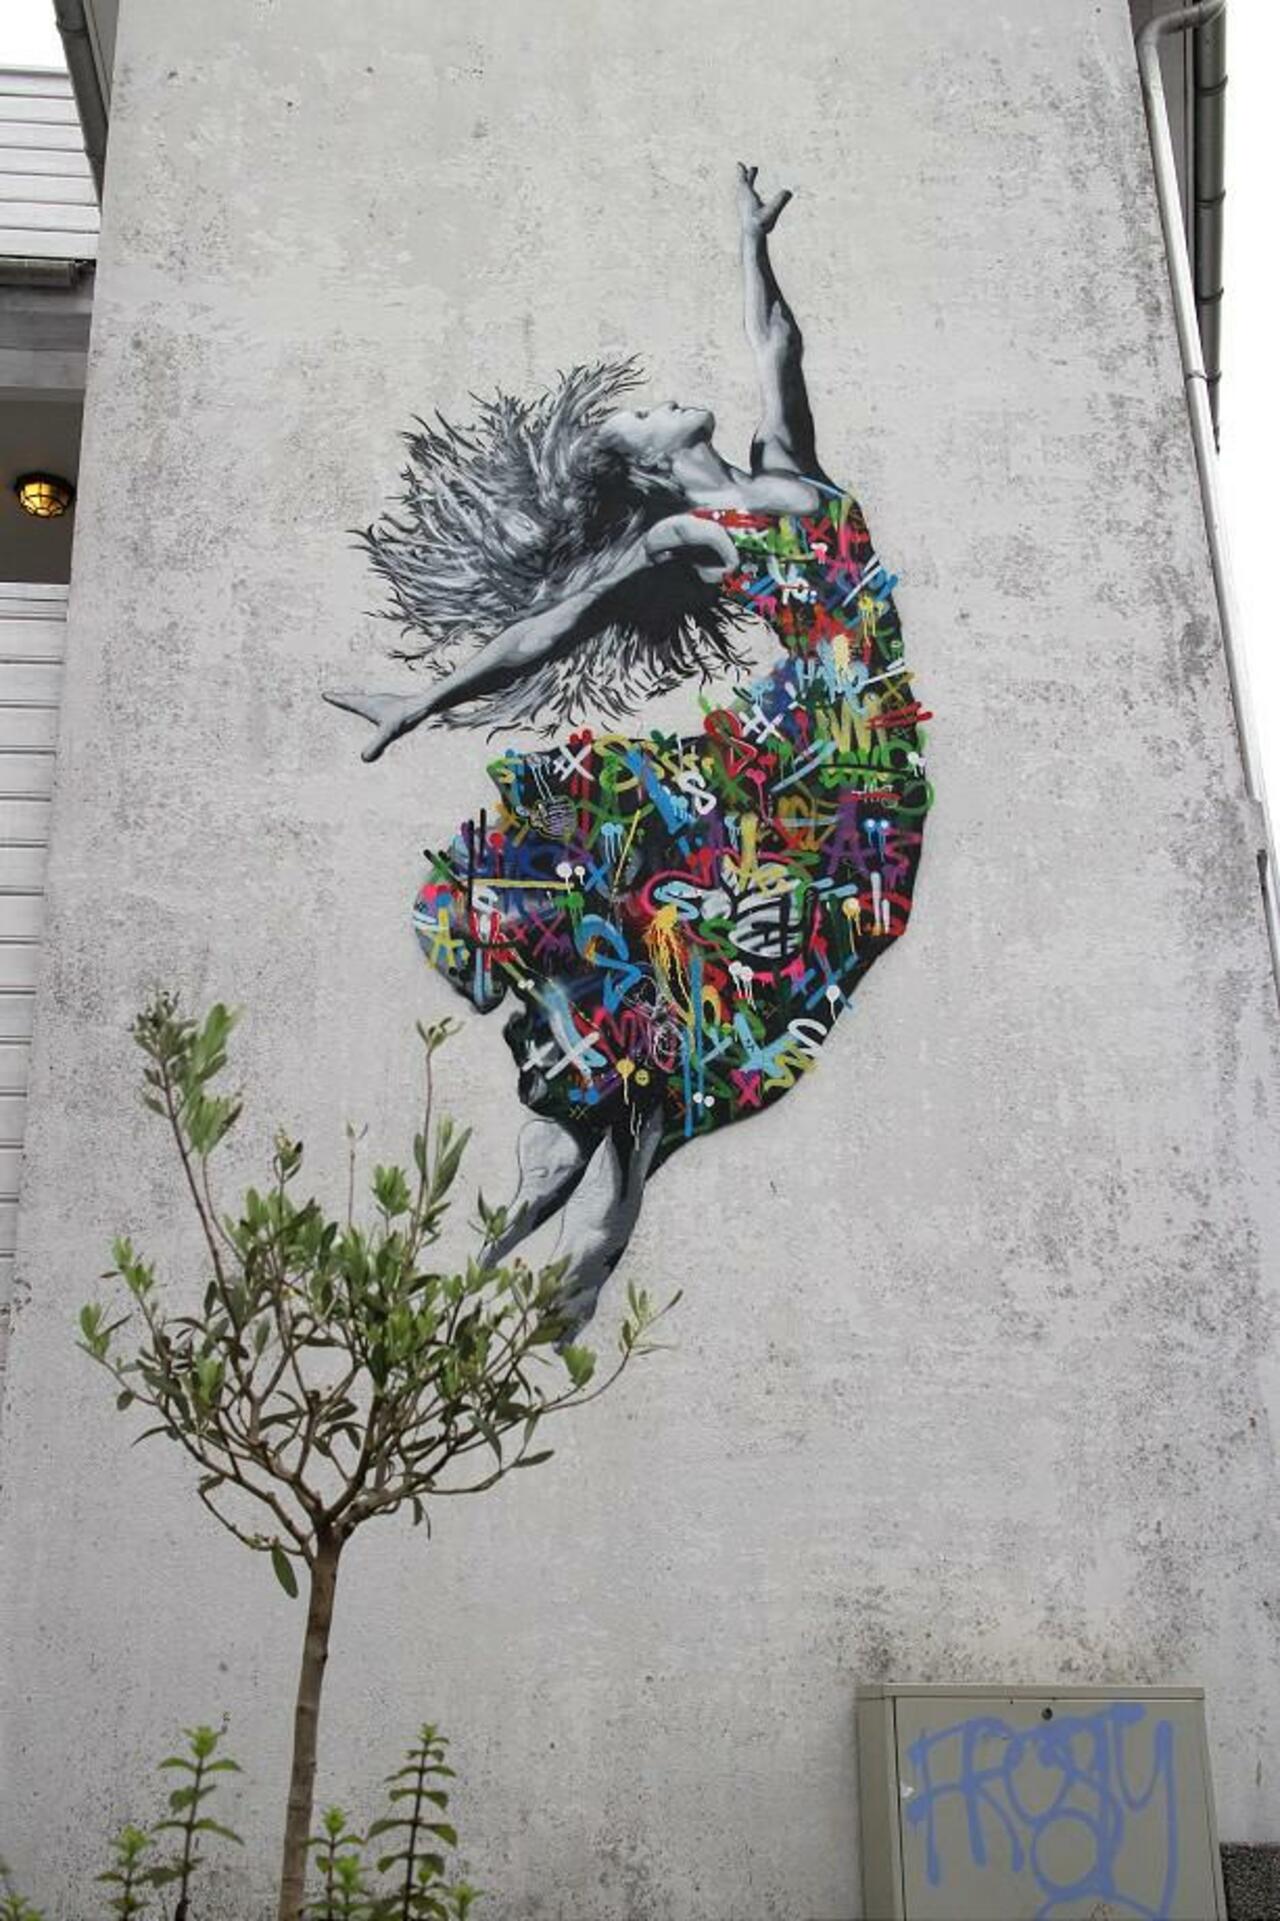 A second mural by Martin Whatson in Stavanger, Norway for Nuart '15. #StreetArt #Graffiti #Mural http://t.co/9qn0FxqafE